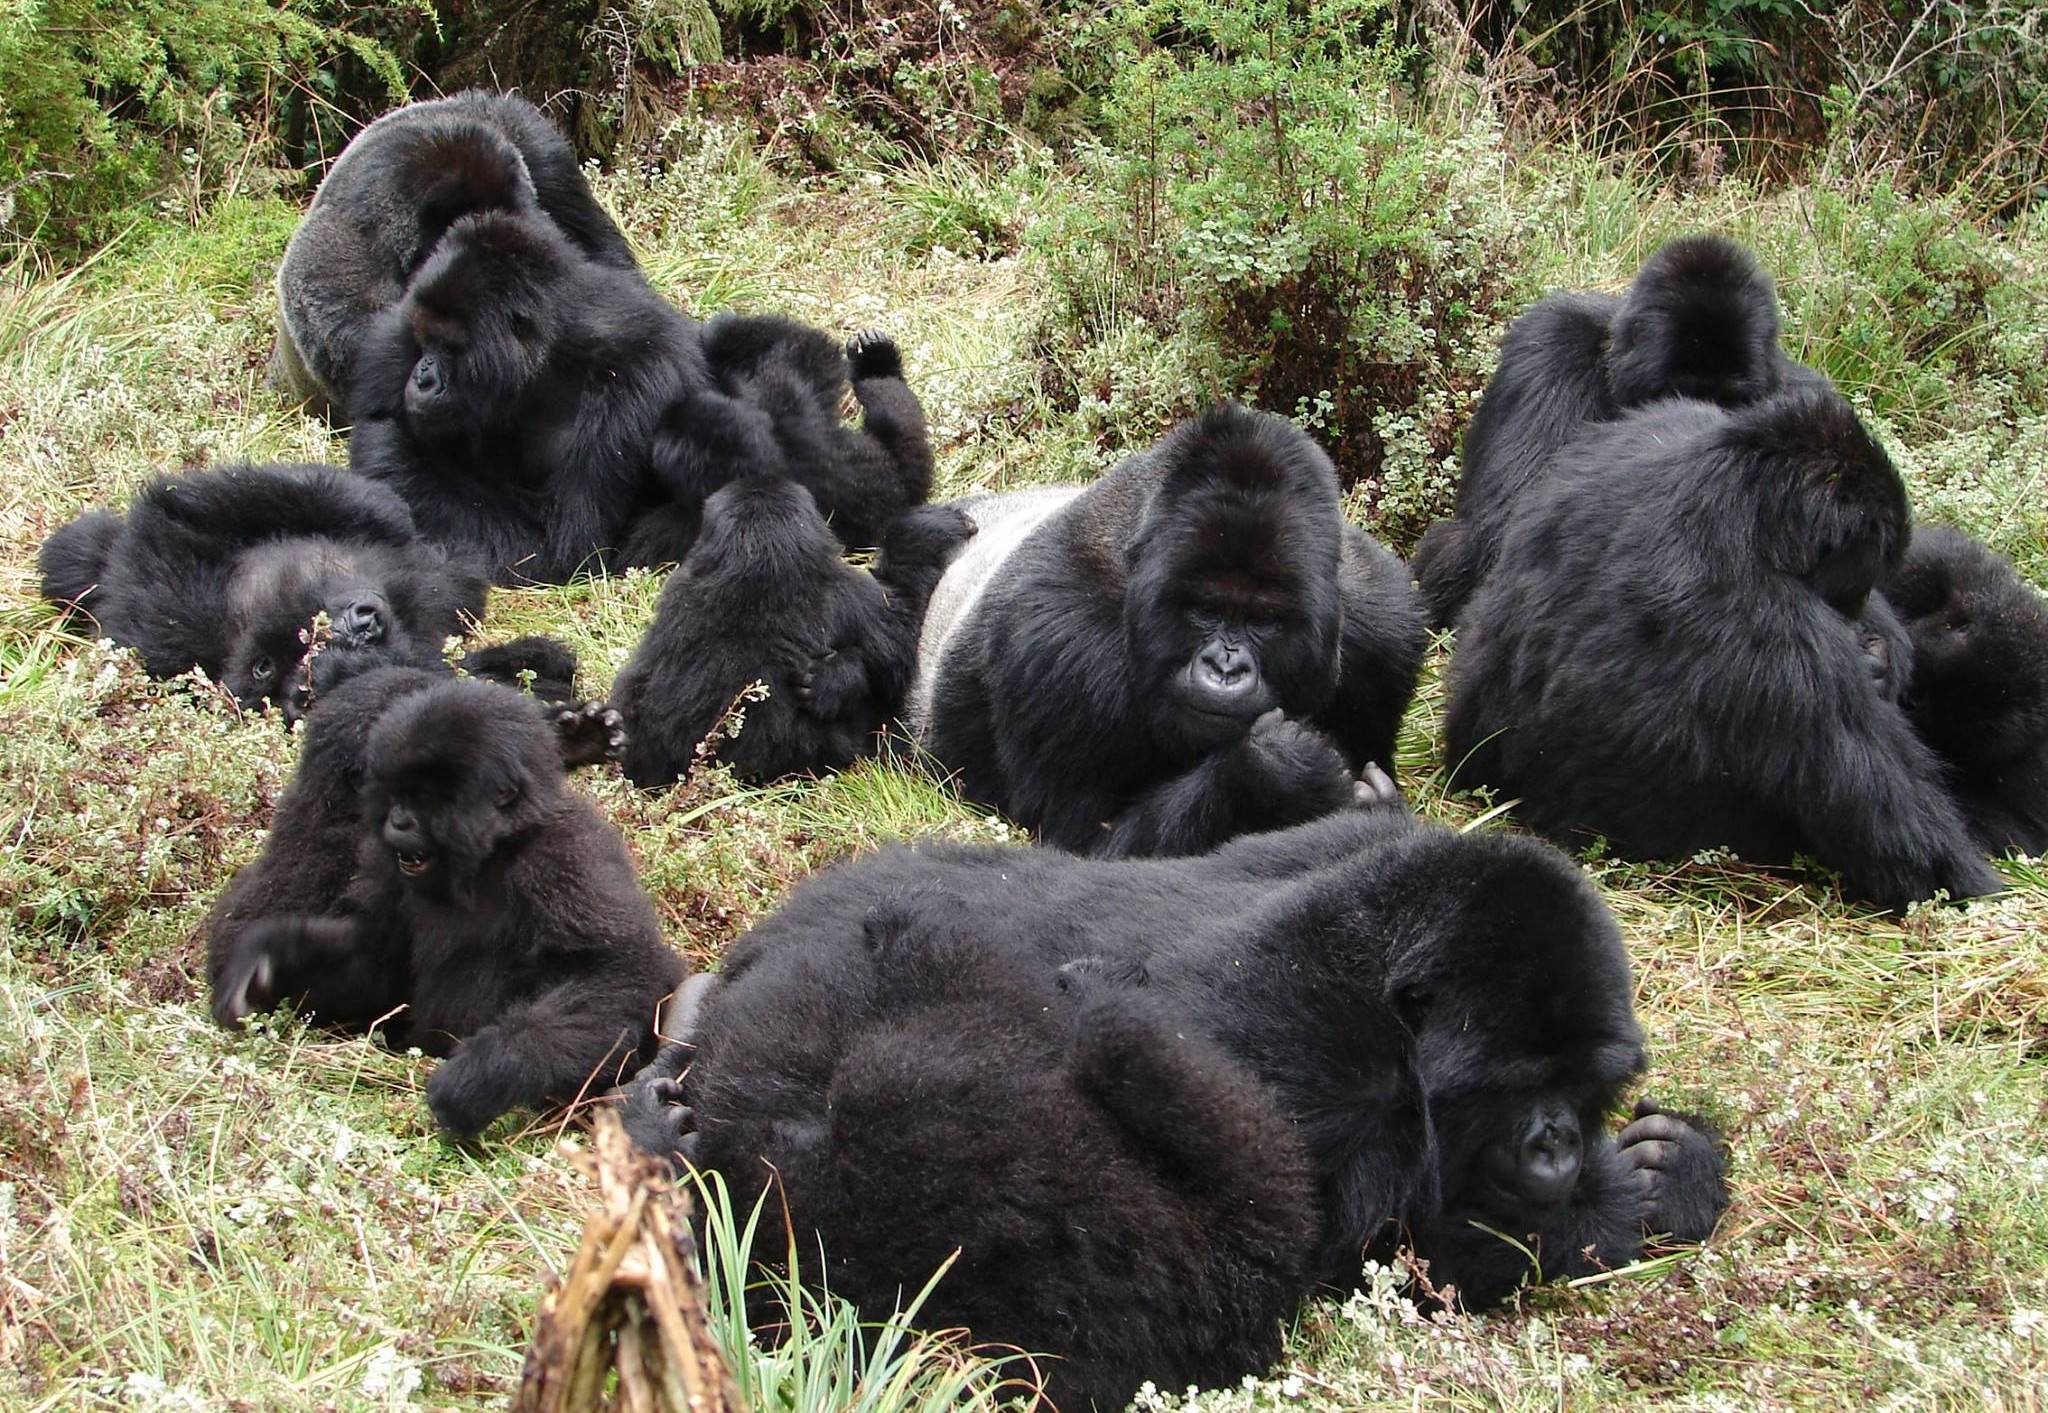 Places to See Gorillas in Africa